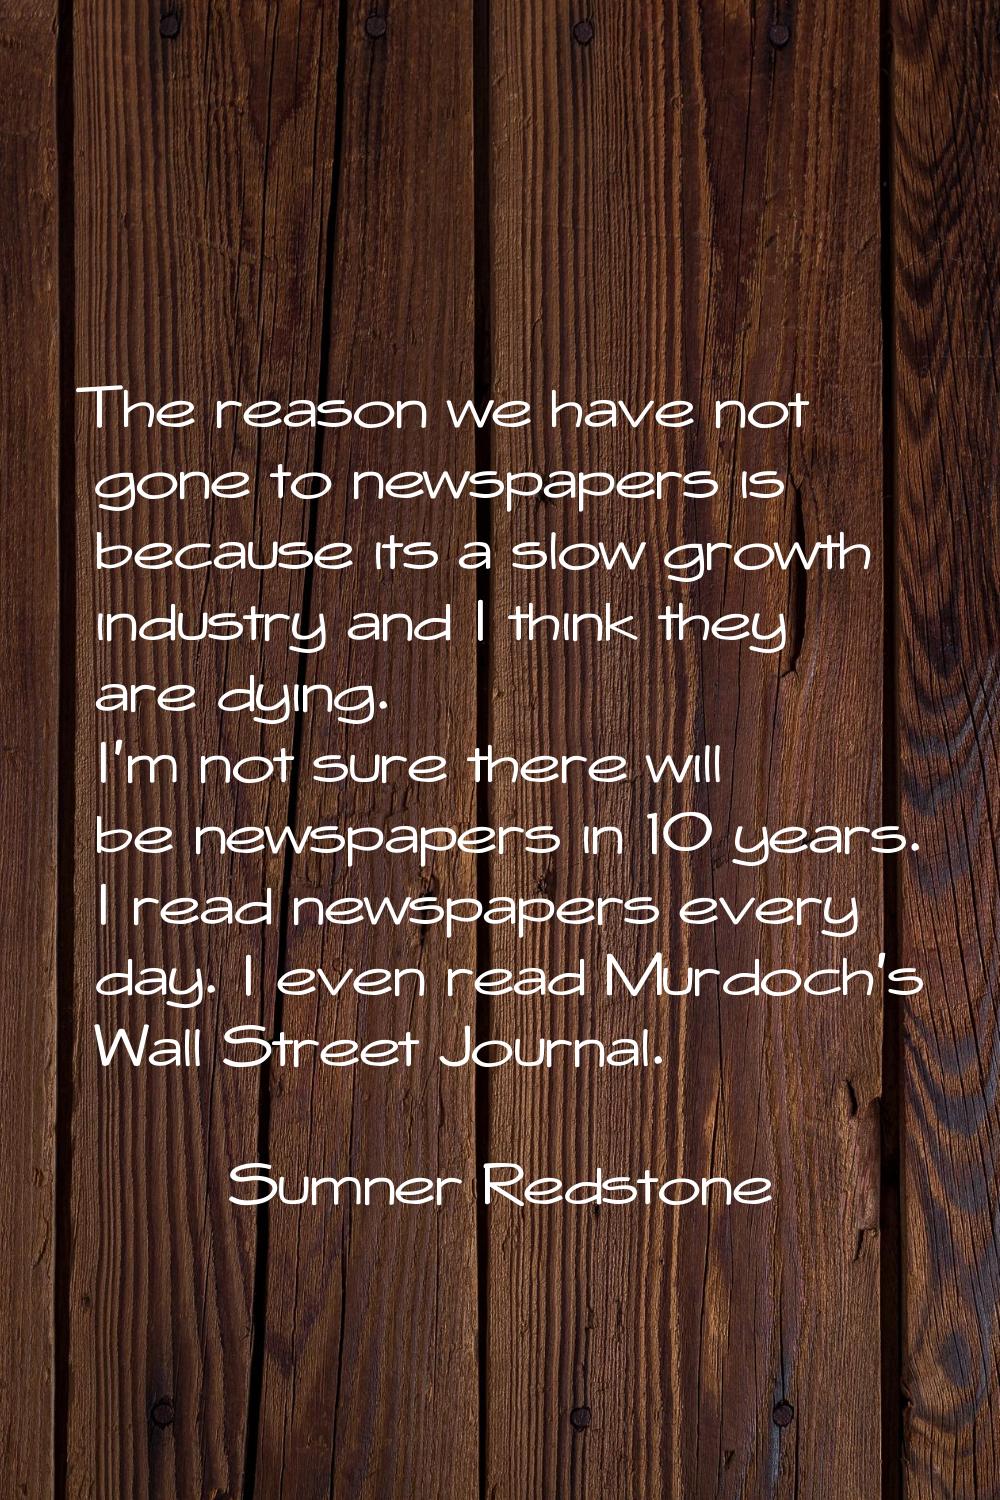 The reason we have not gone to newspapers is because its a slow growth industry and I think they ar